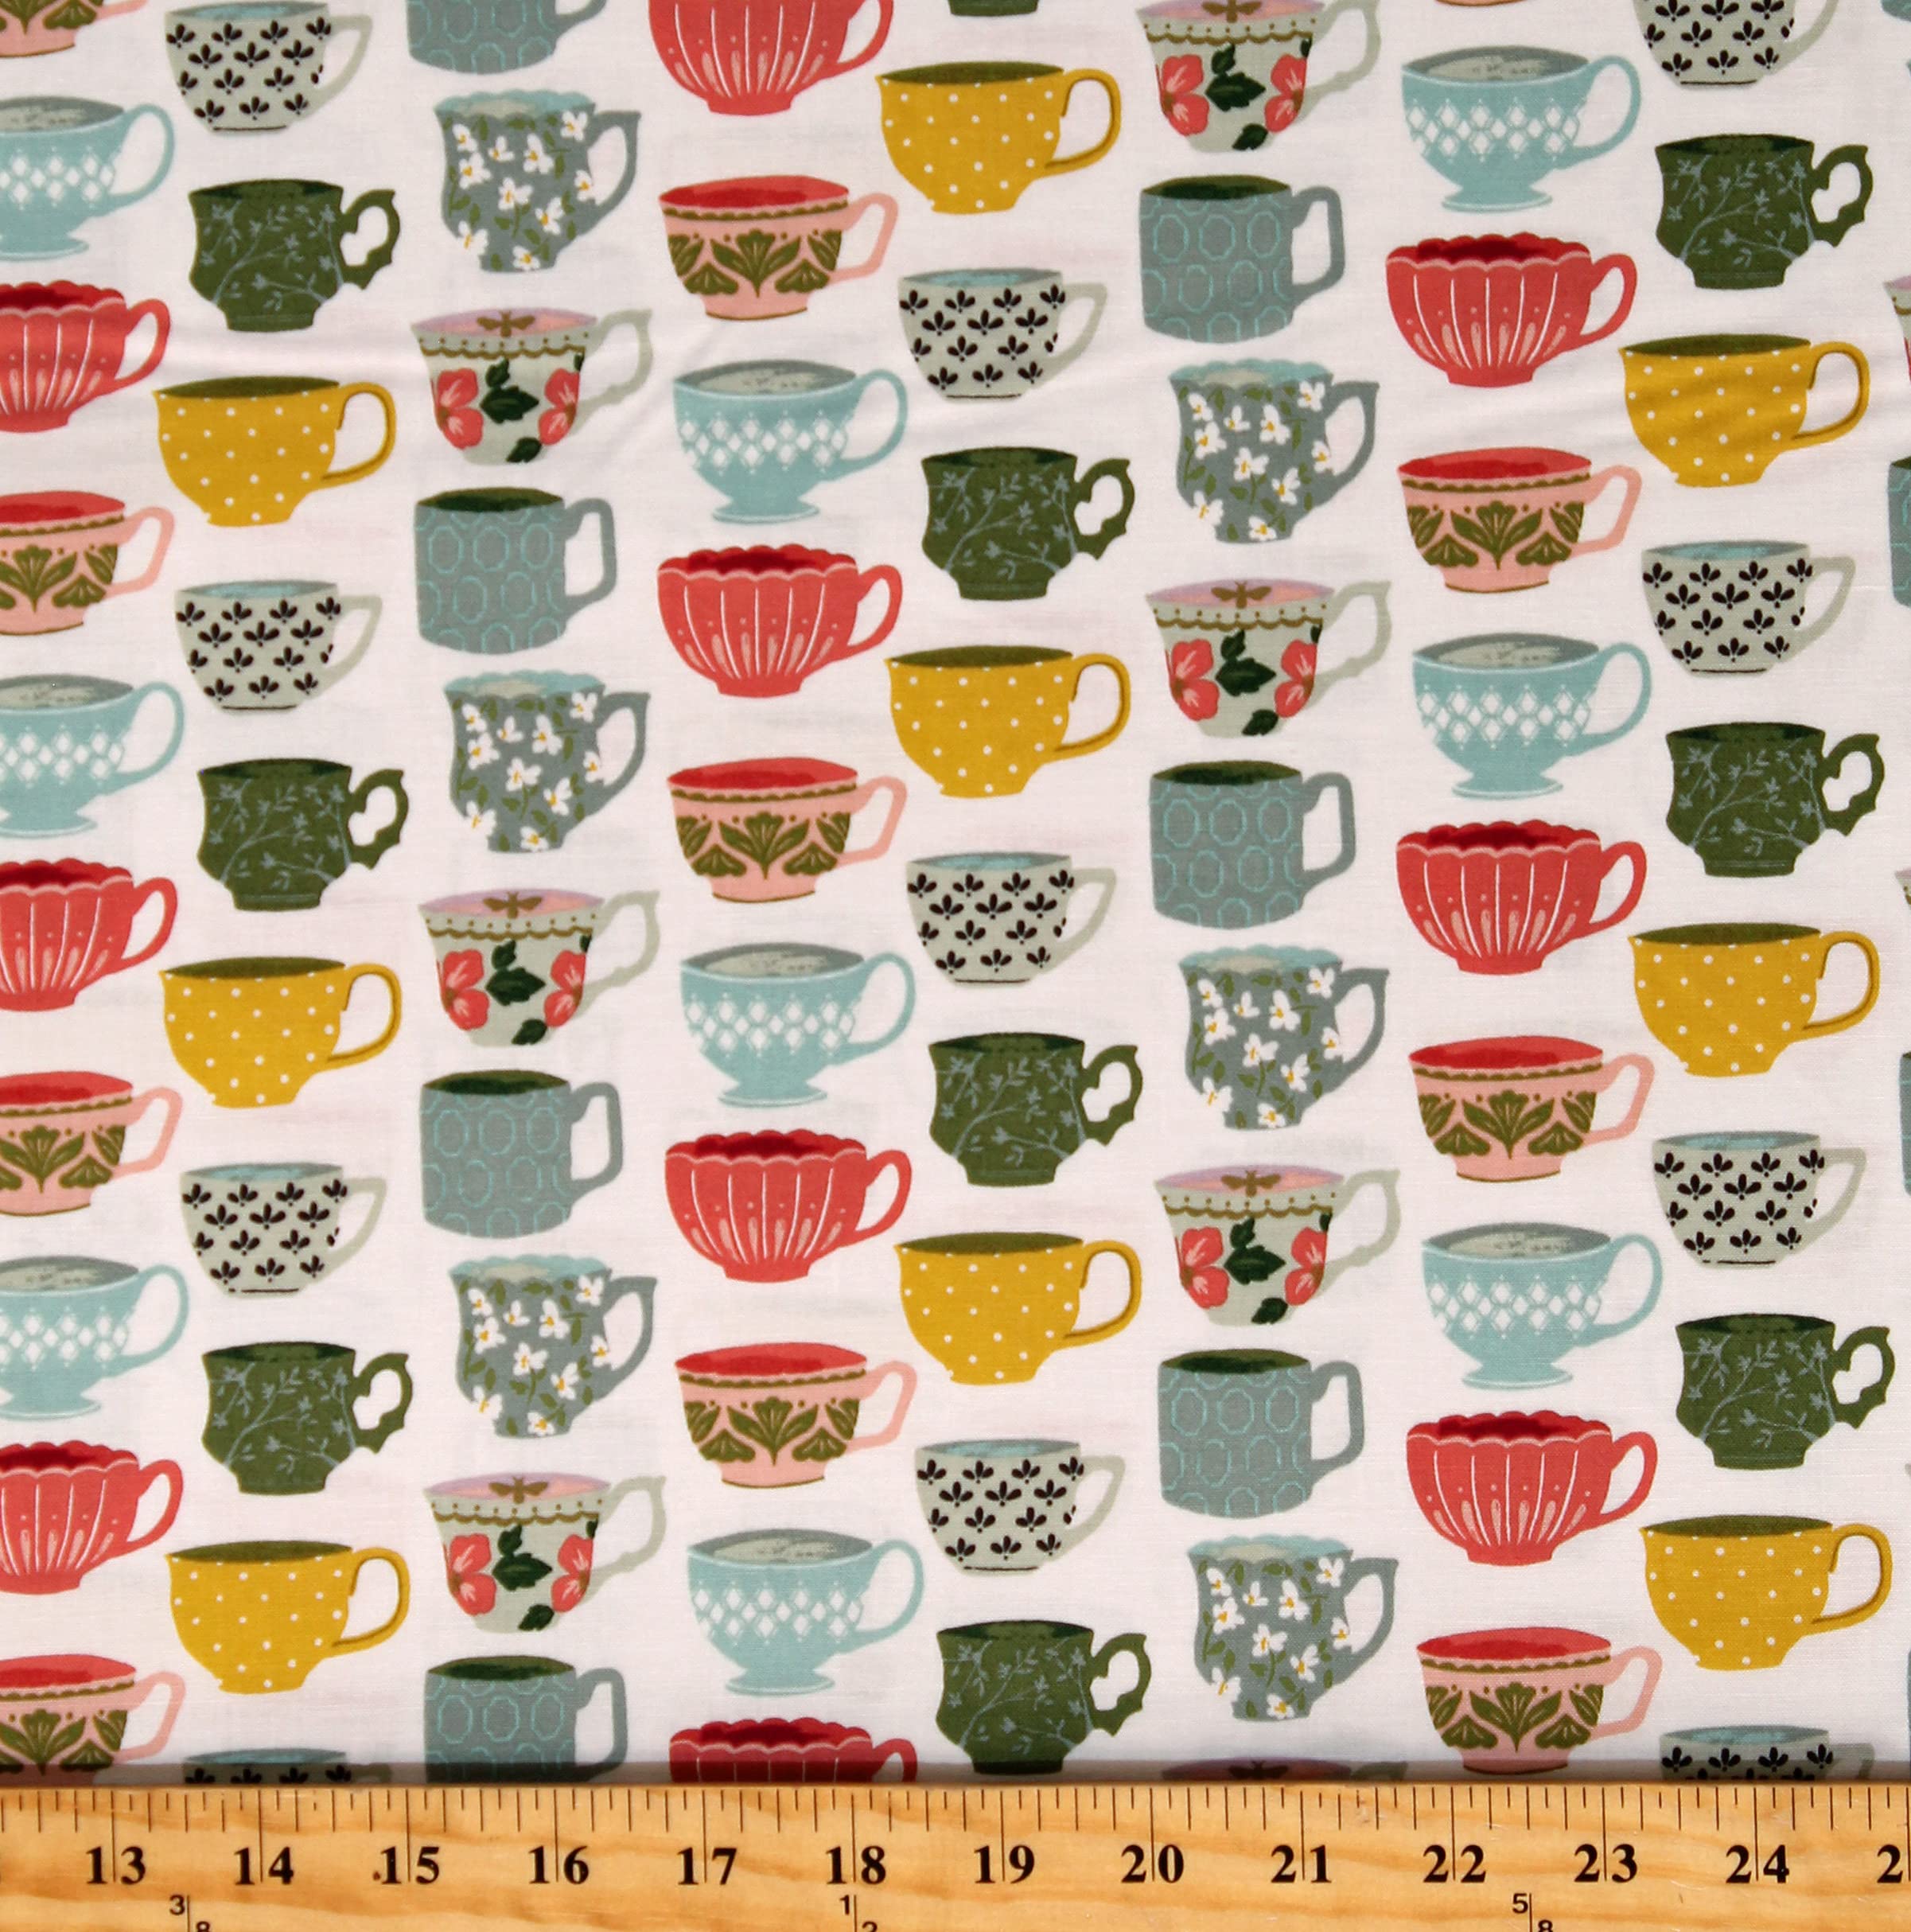 Cotton Tea Cups Mugs Dishes Coffee Tea with Bea White Cotton Fabric Print by The Yard (C10492)